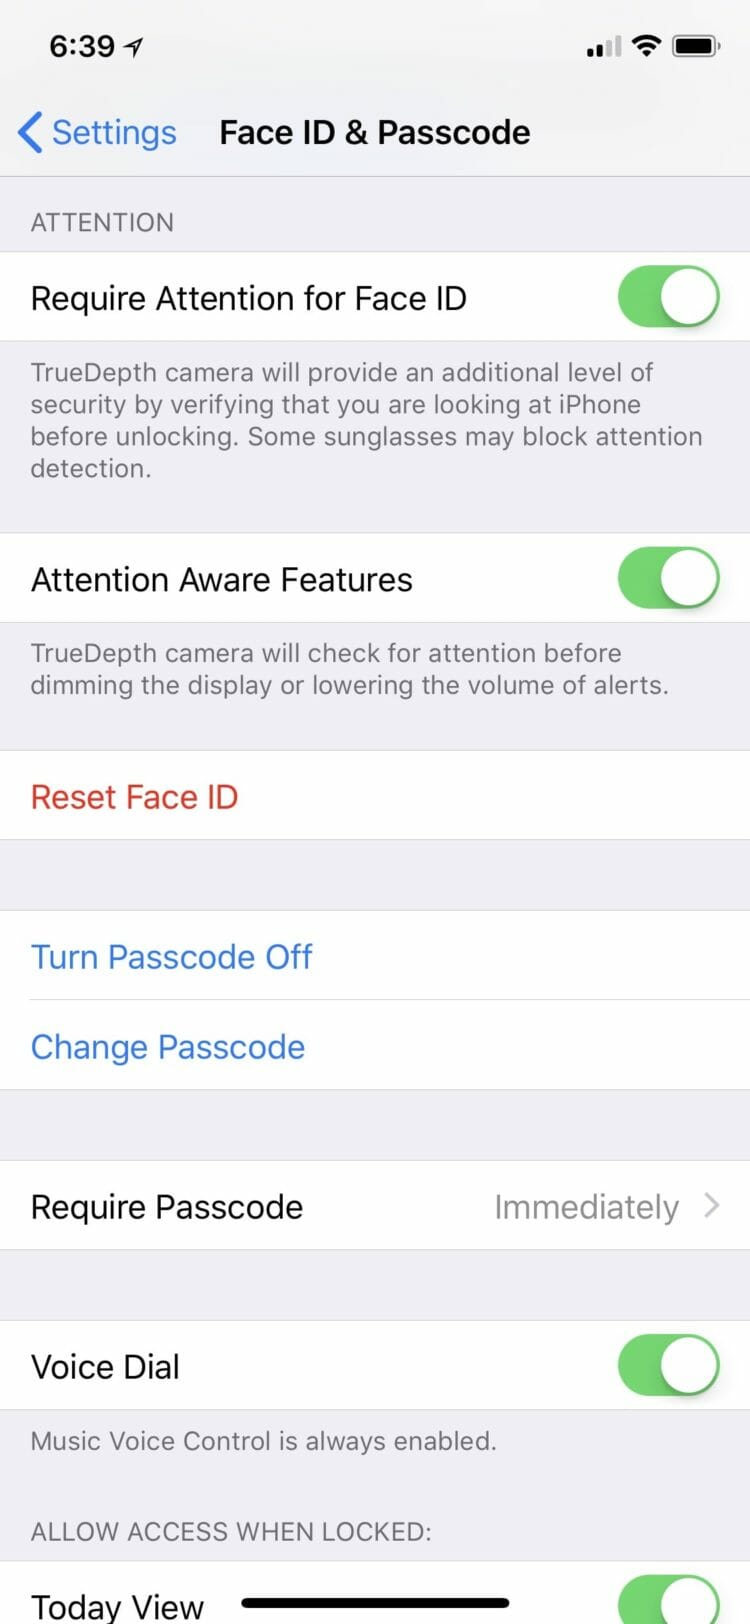 Face ID: Attention Aware Features